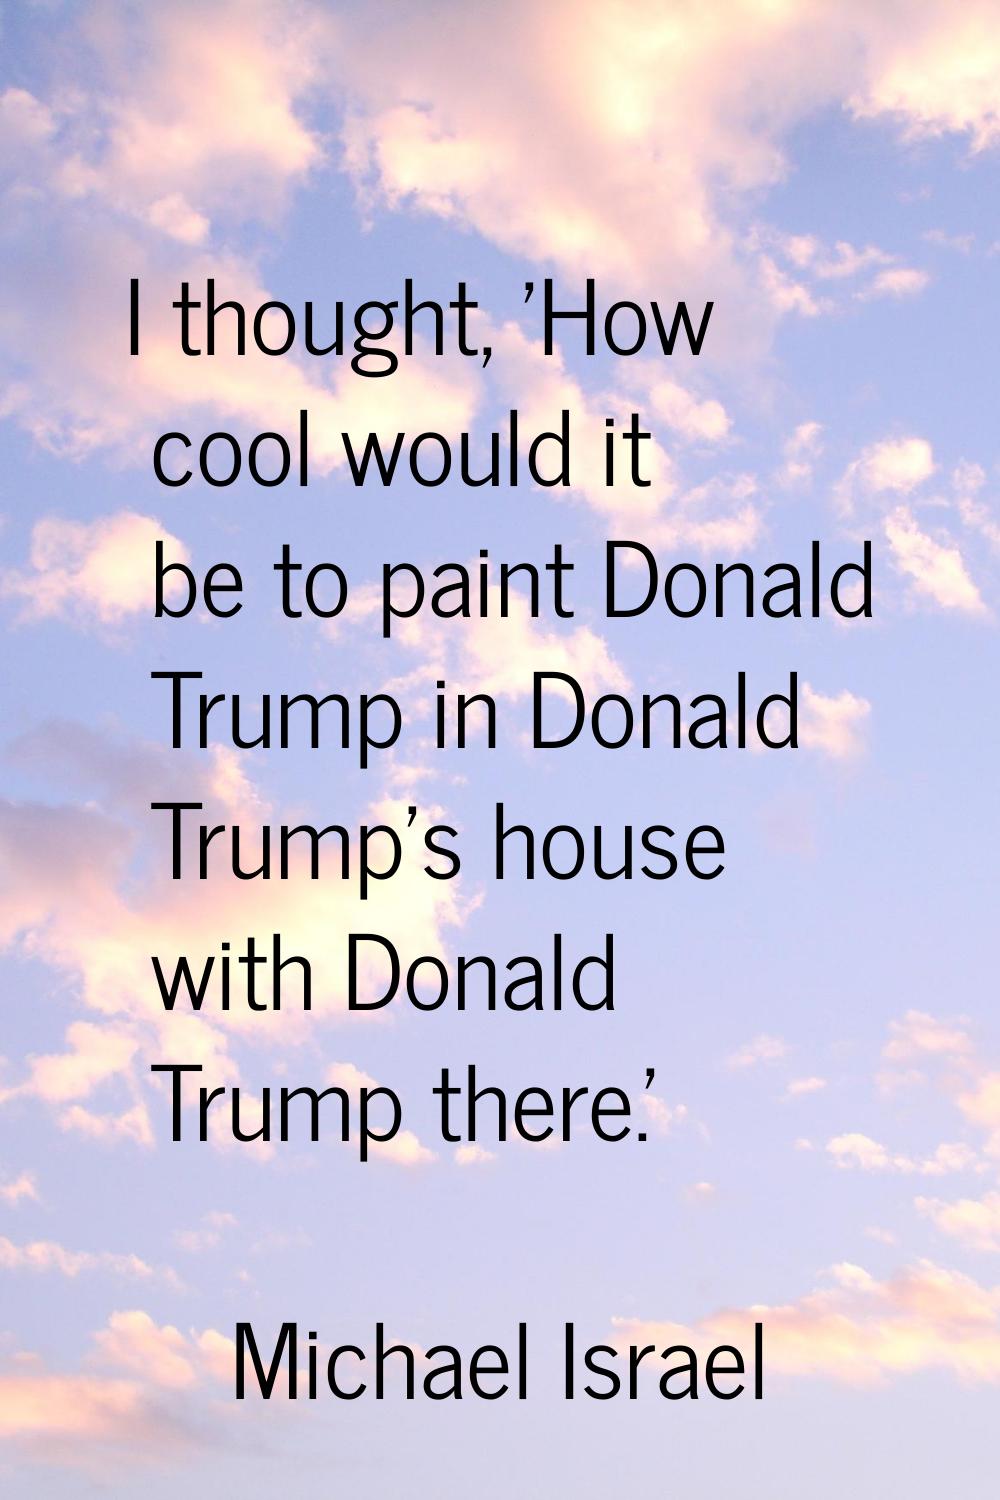 I thought, 'How cool would it be to paint Donald Trump in Donald Trump's house with Donald Trump th